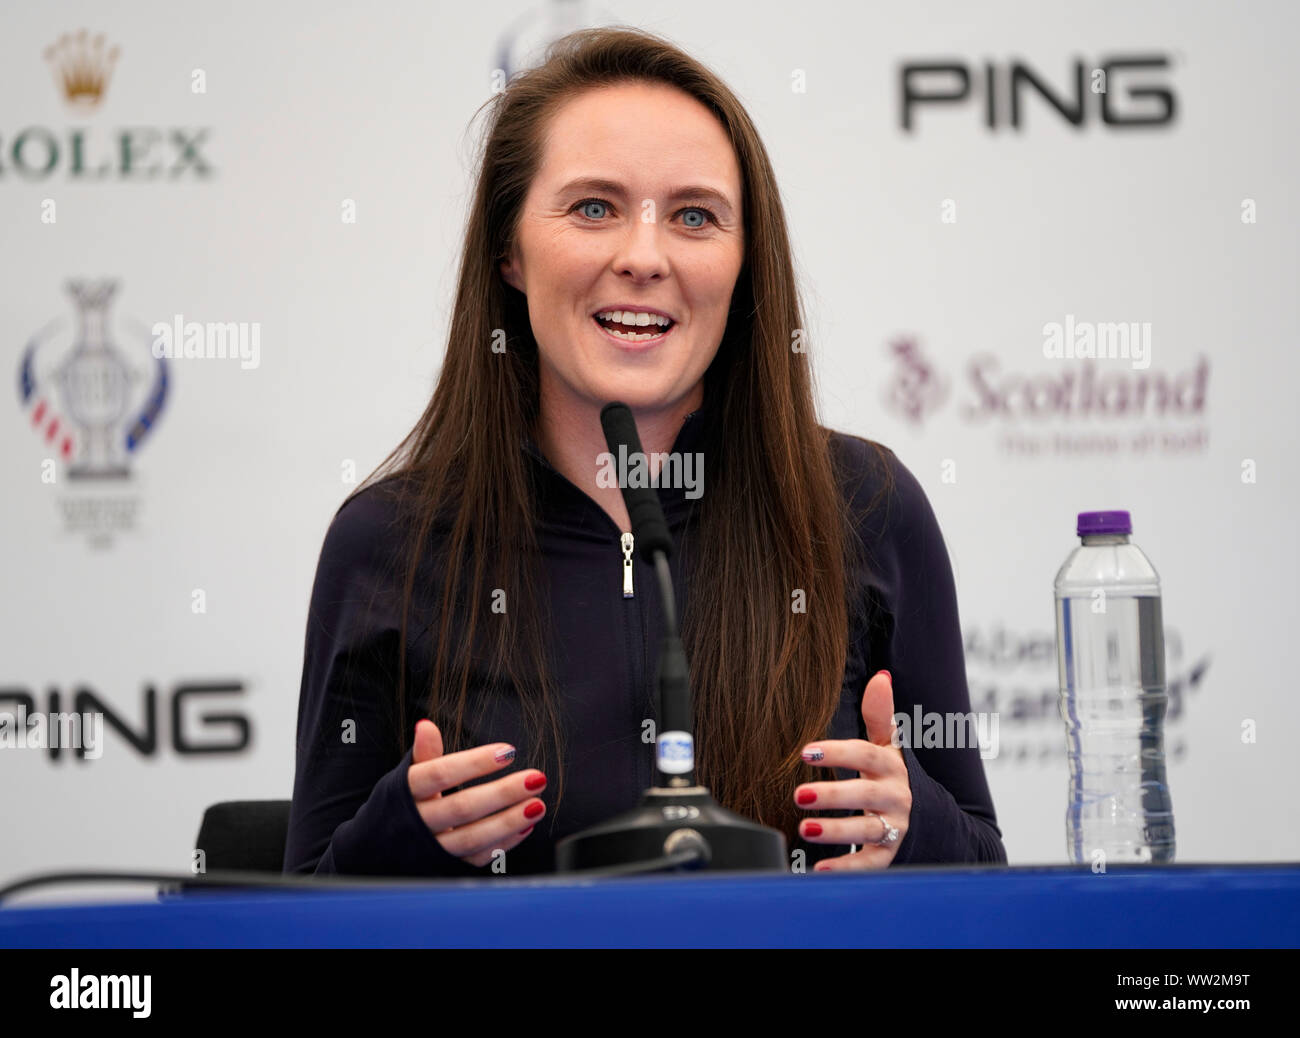 Auchterarder, Scotland, UK. 12 September 2019. Press conference with Team USA players for the 2019 Solheim Cup. Pictured; Brittany Altomare. Iain Masterton/Alamy Live News Stock Photo